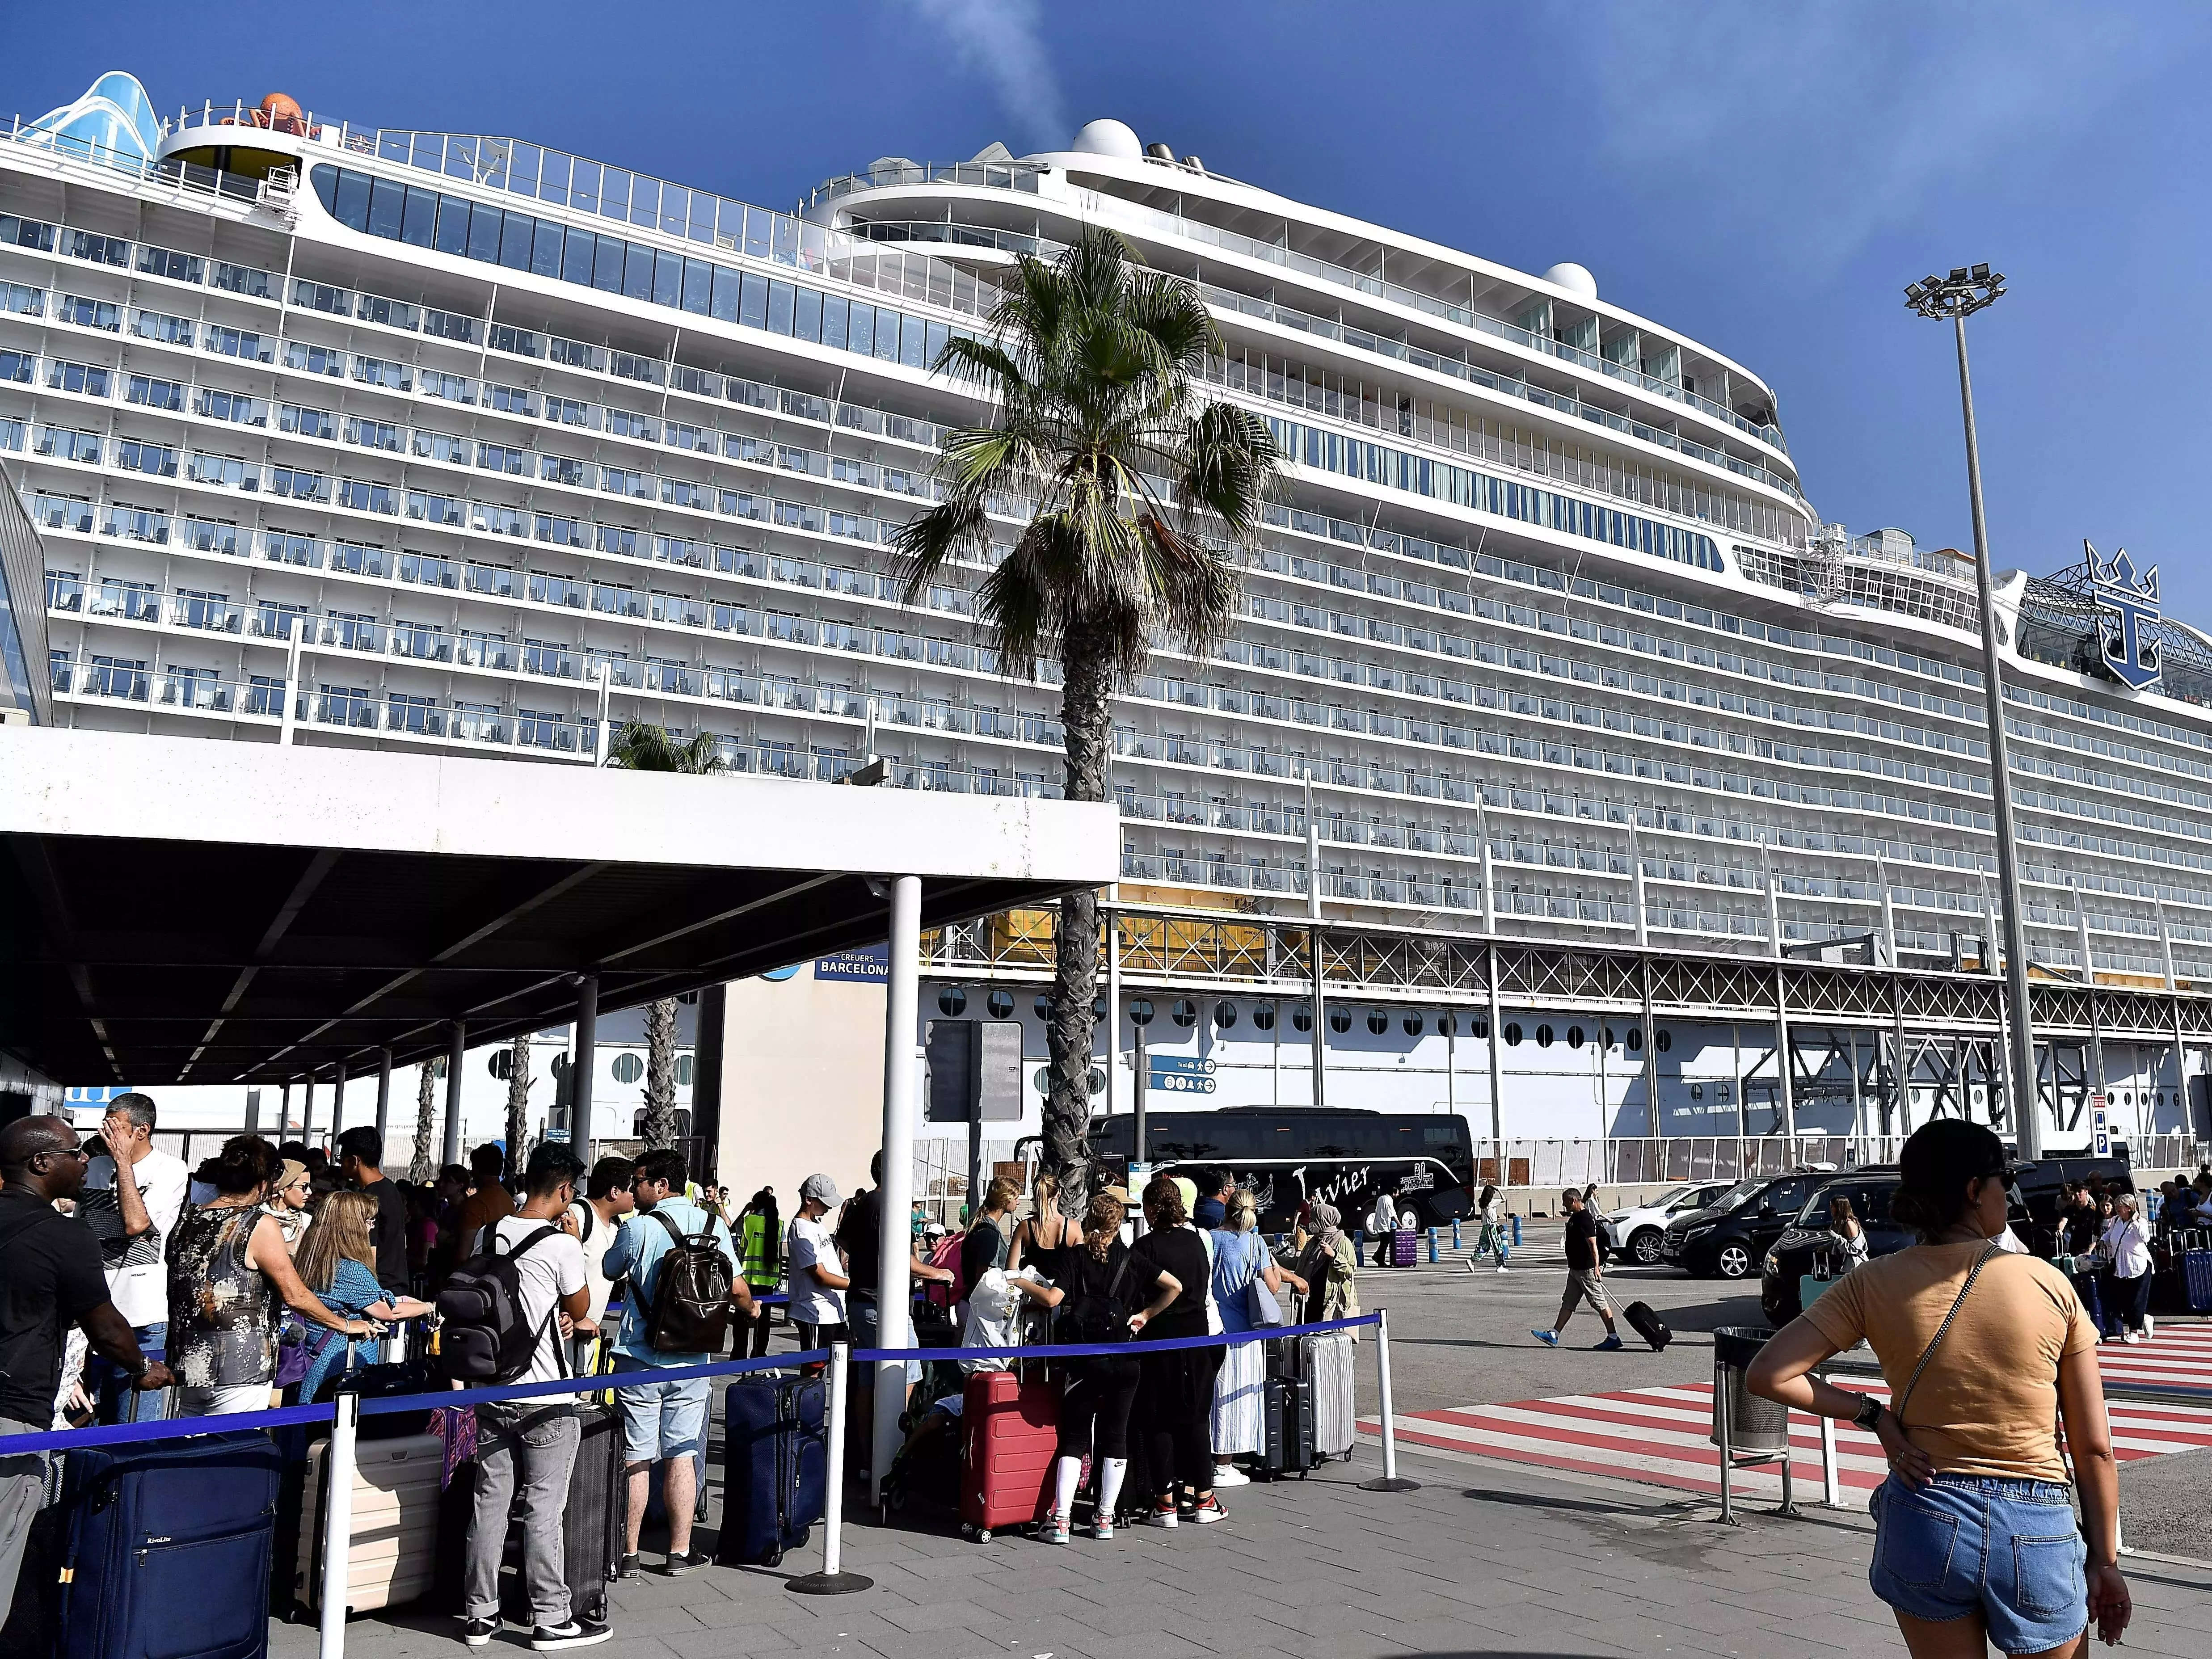 https://www.businessinsider.in/photo/100535540/family-stands-to-lose-nearly-6000-in-airfare-and-hotel-costs-after-they-were-bumped-from-an-overbooked-cruise-ship.jpg?imgsize=2249514